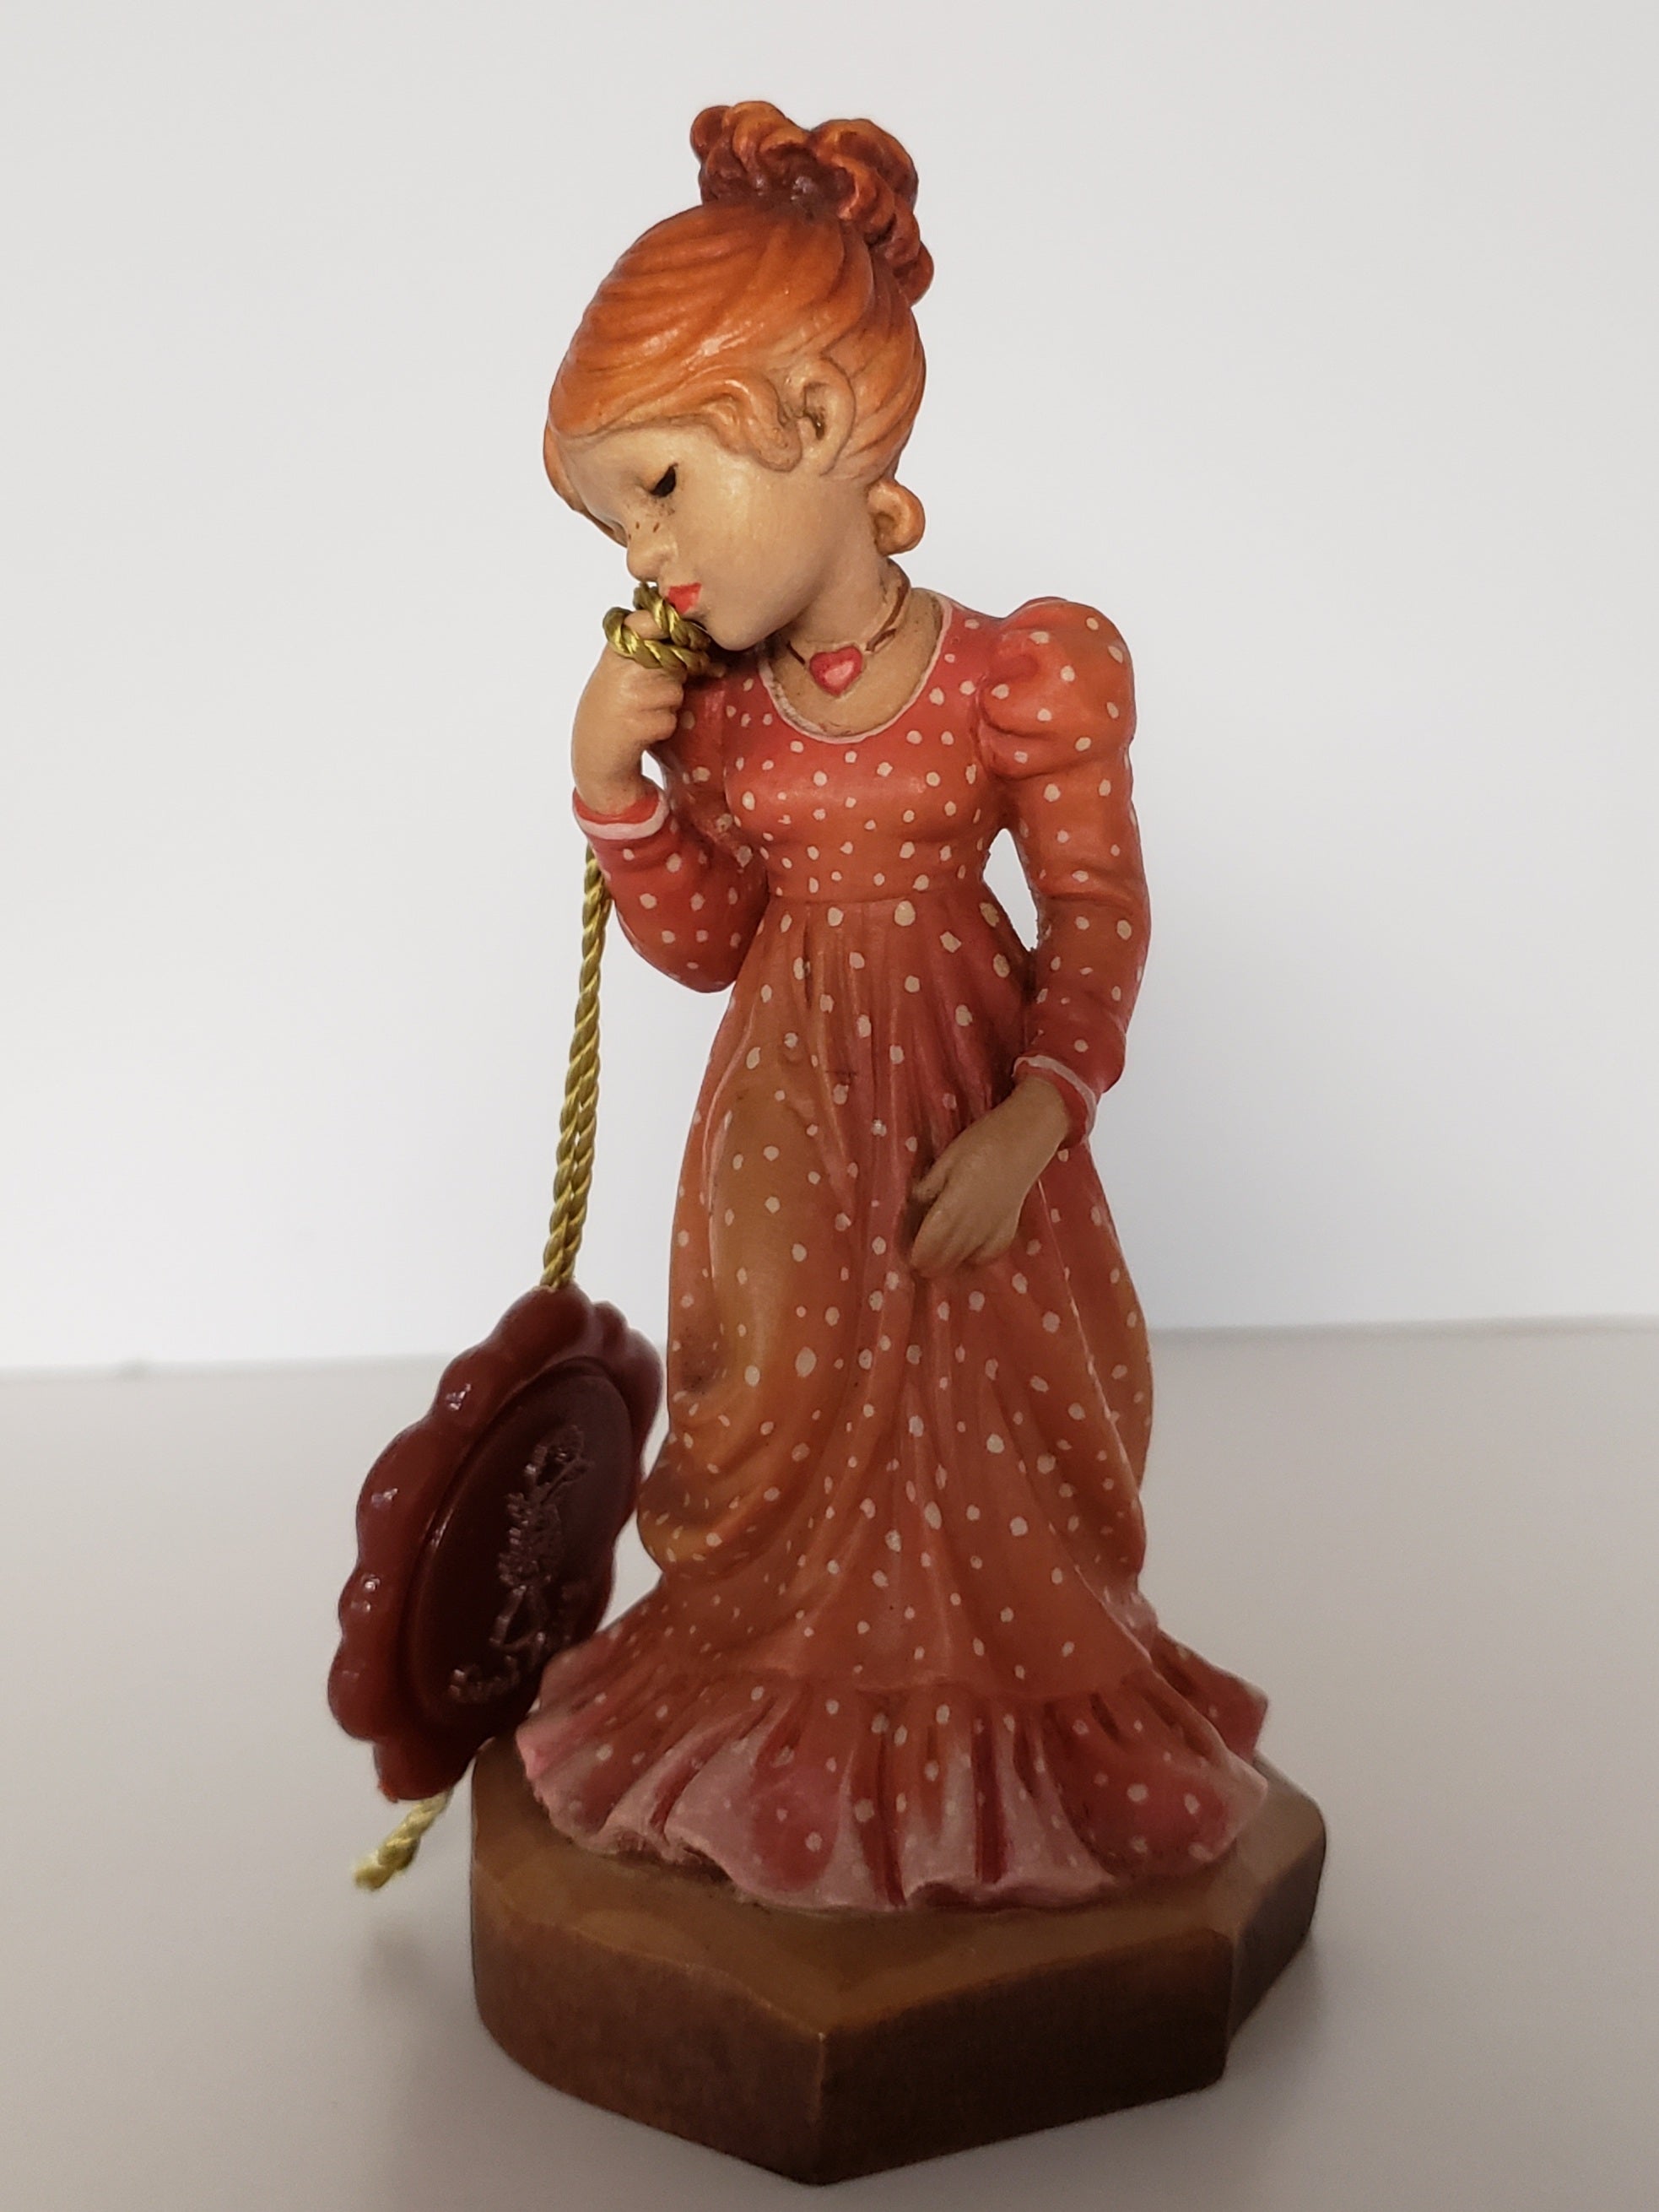 Anri The Sara Kay Collection. Wood Carved Figurines - Made in Italy.